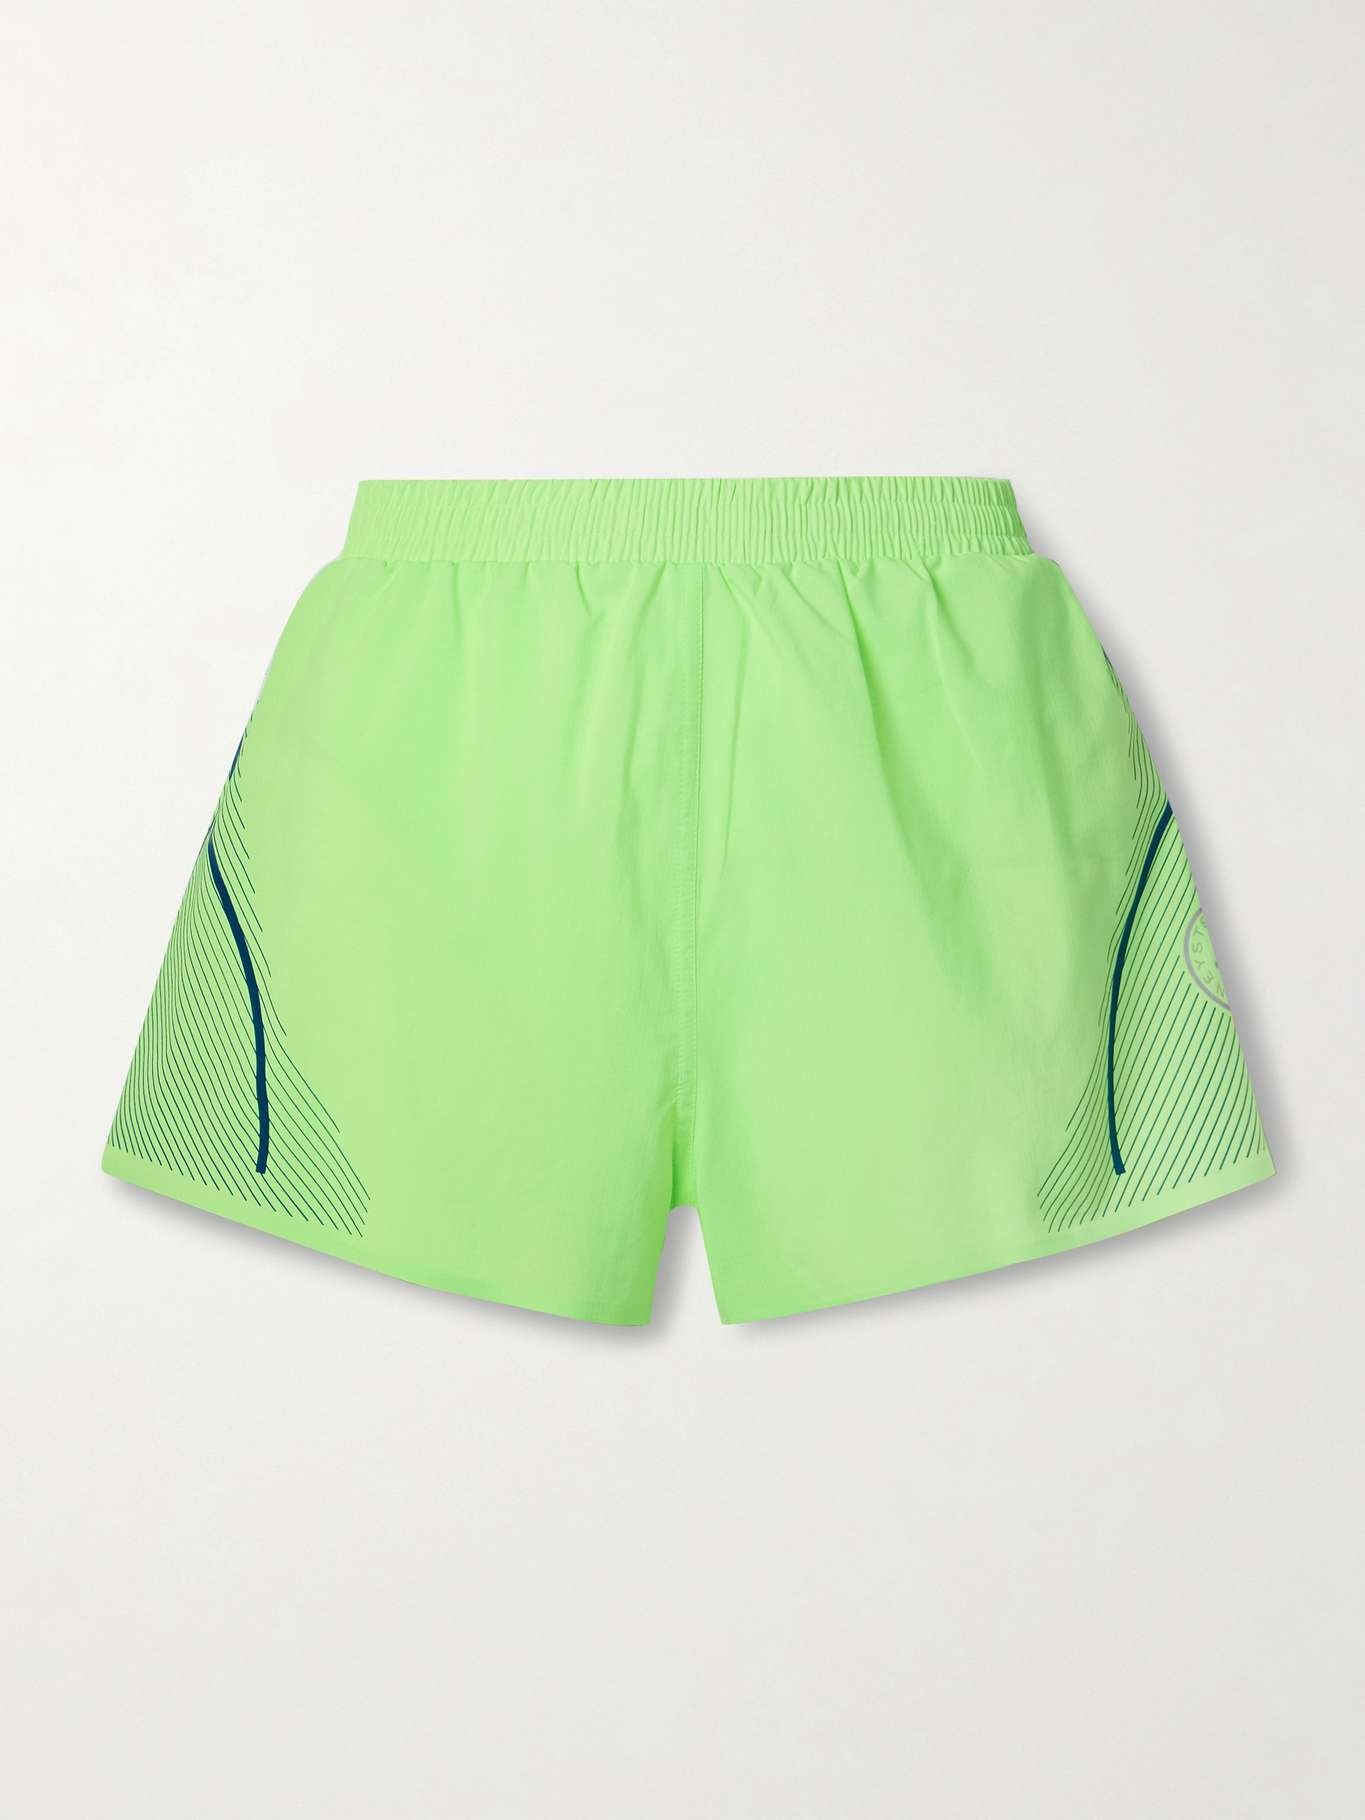 TruePace printed recycled-ripstop shorts - 1